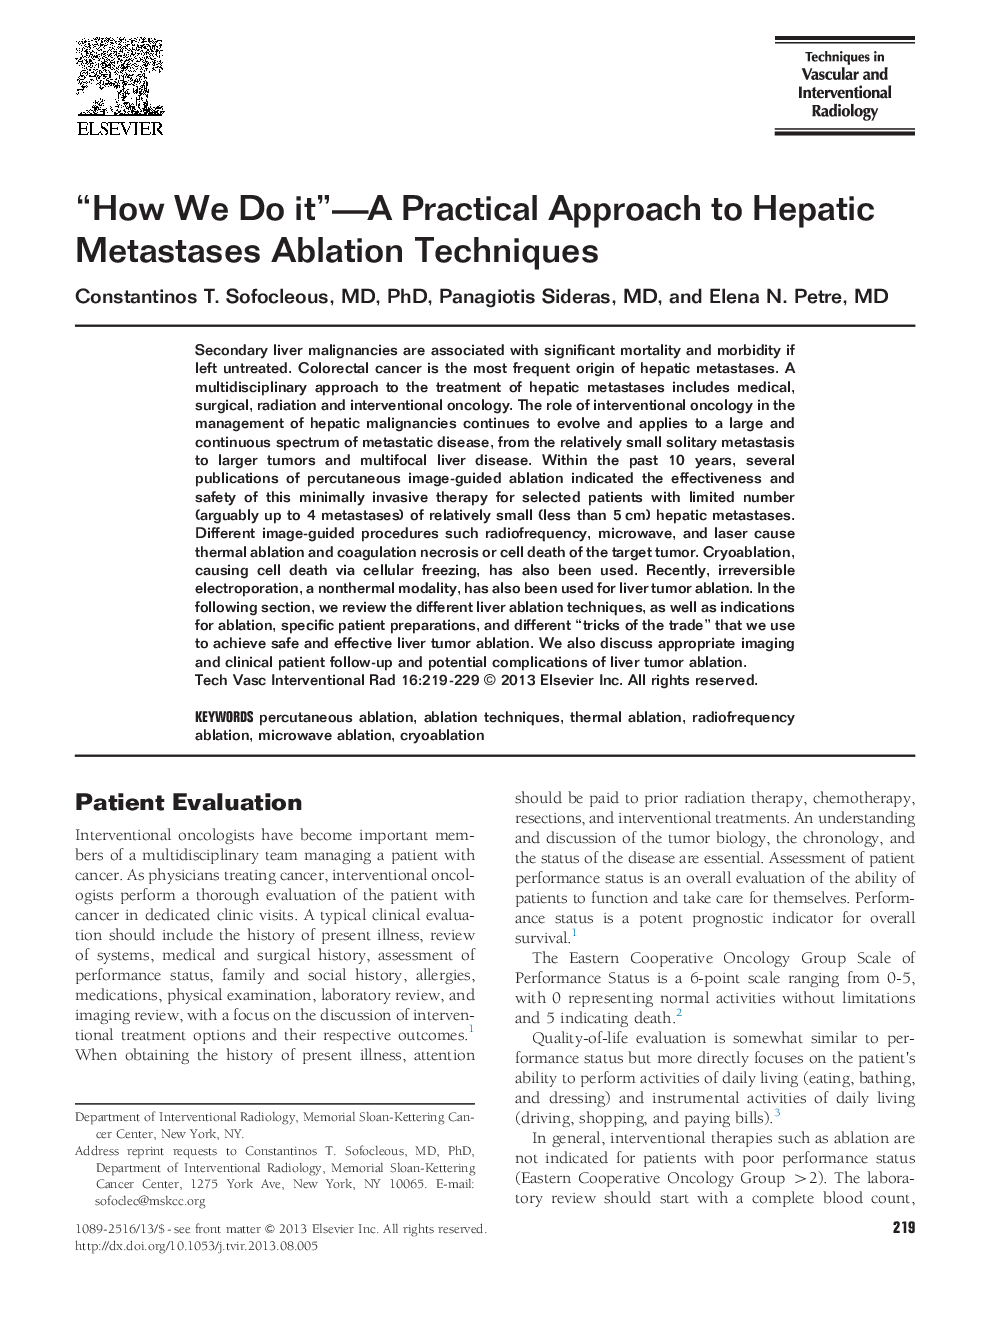 “How We Do it”—A Practical Approach to Hepatic Metastases Ablation Techniques